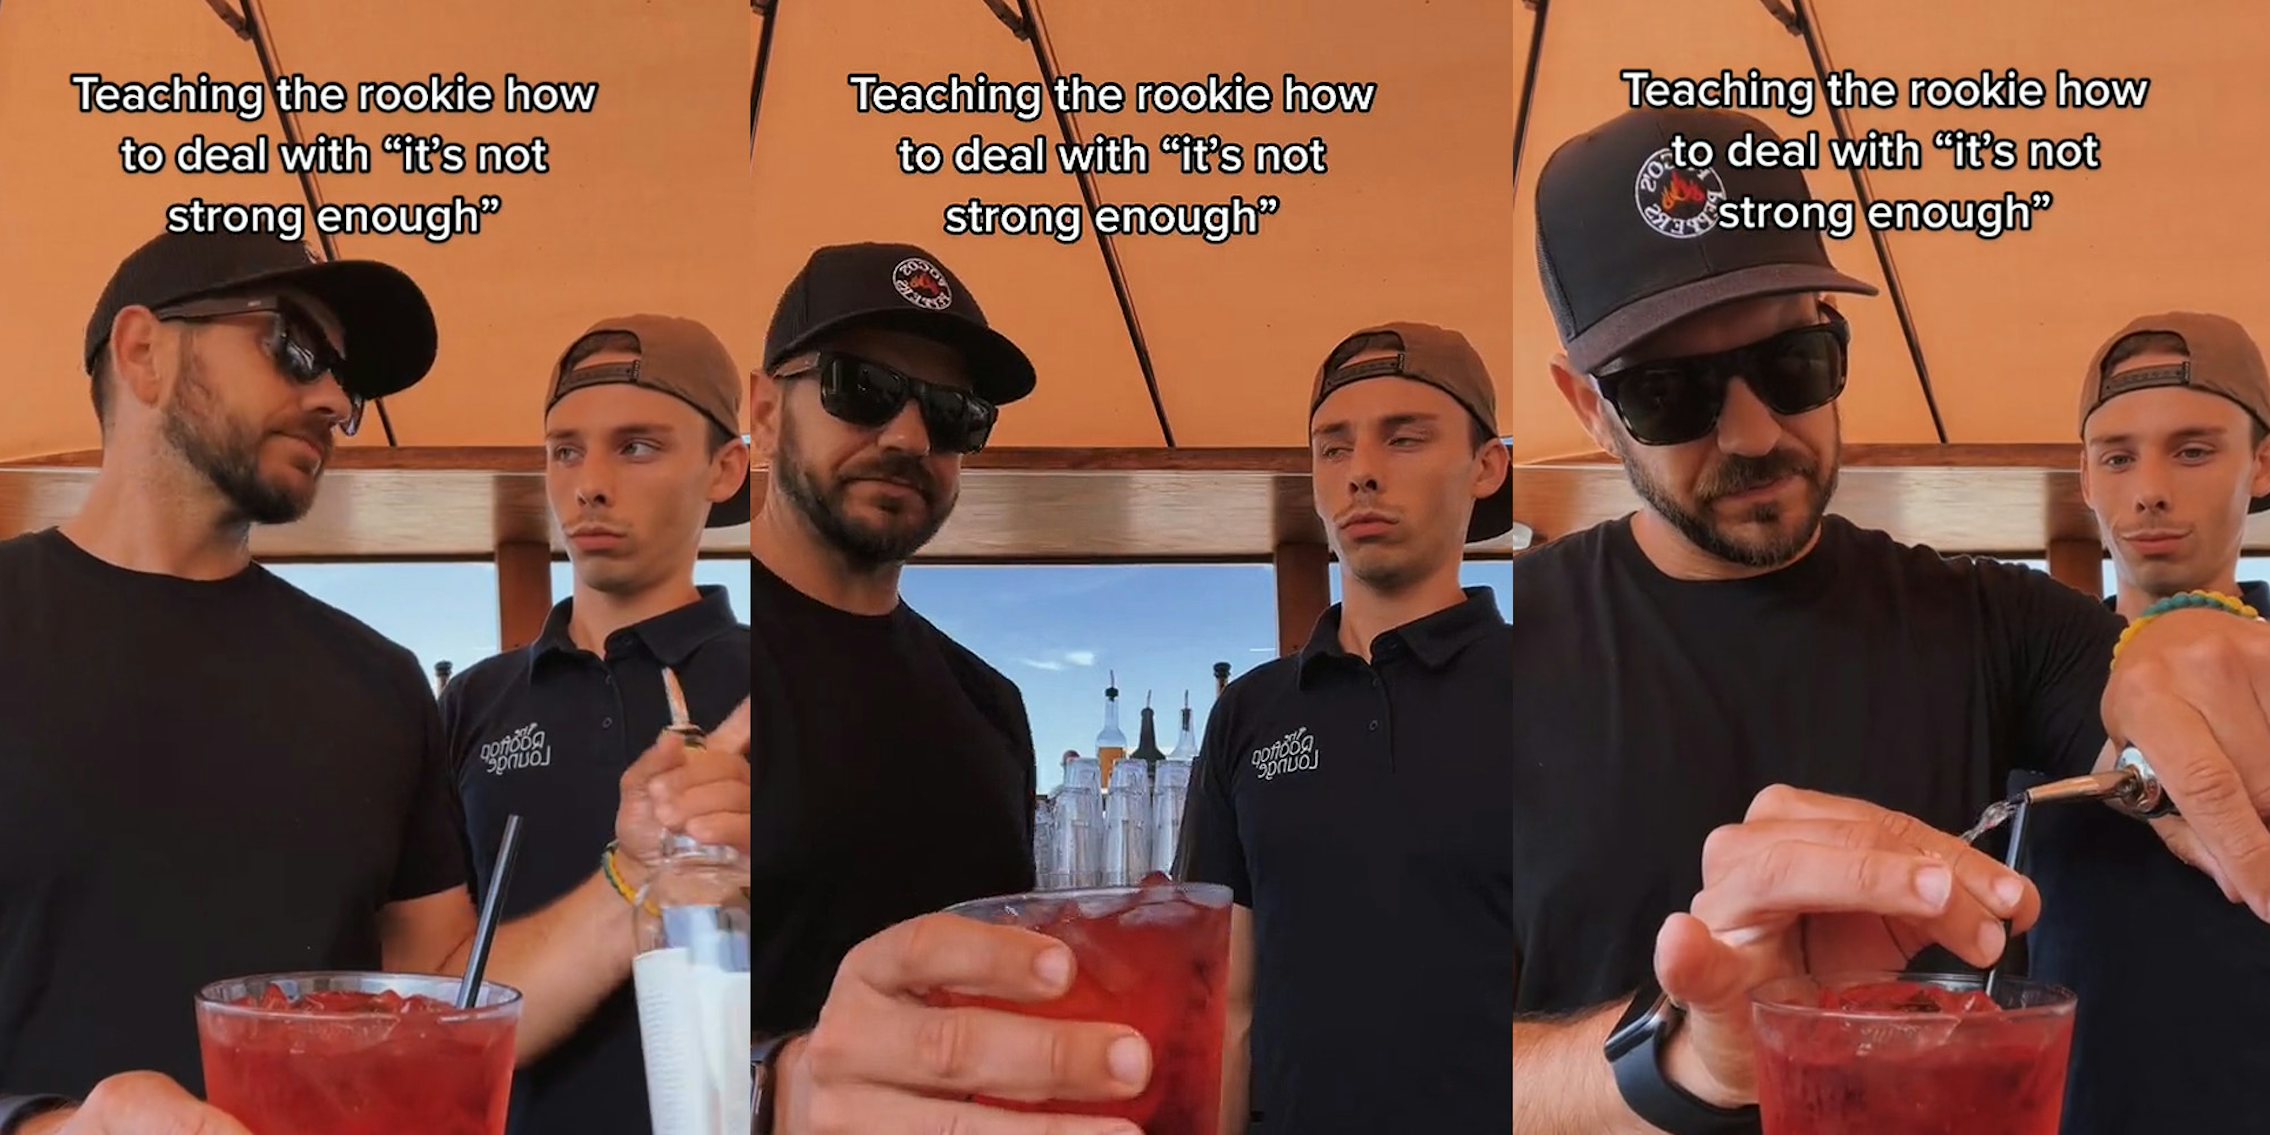 bartenders looking at each other one hand on drink other with liquor caption 'Teaching the rookie how to deal with 'it's not strong enough' (l) bartender holding drink another bar tender looking at him caption 'Teaching the rookie how to deal with 'it's not strong enough' (c) bartender holding straw in drink while pouring liquor in it while other bartender watches caption 'Teaching the rookie how to deal with 'it's not strong enough' (r)